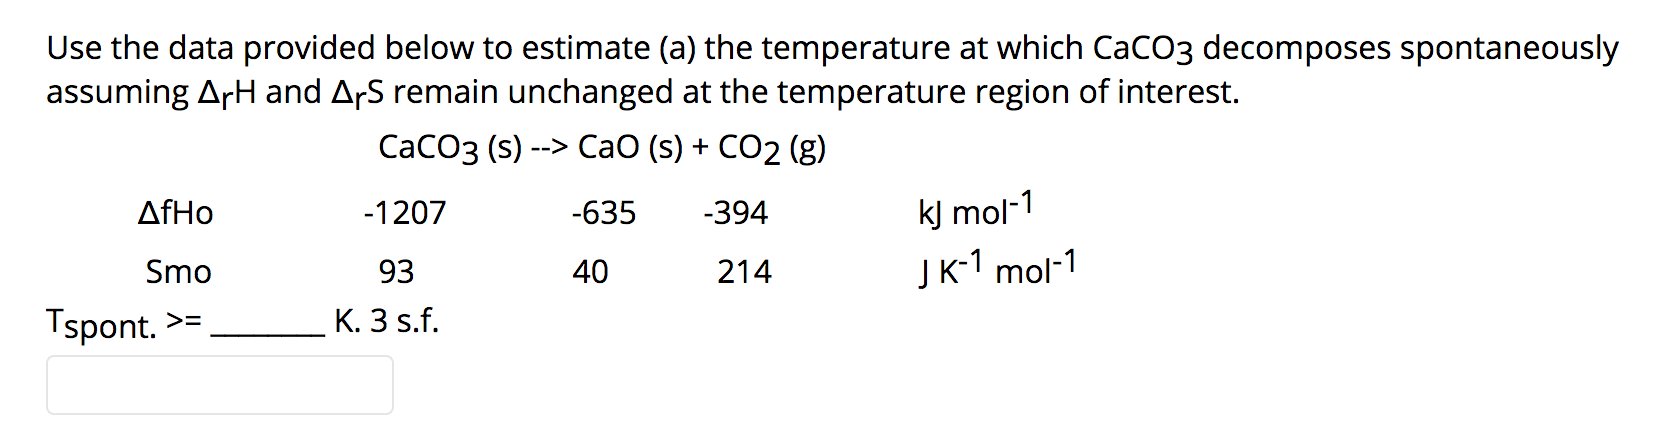 Use the data provided below to estimate (a) the temperature at which CaCO3 decomposes spontaneously
assuming ArH and ArS remain unchanged at the temperature region of interest.
СаСОз (s) --> СaO (s) + CО2 (g)
kJ mol-1
Jк1 mol-1
AfHo
-1207
-635
-394
Smo
93
40
214
Tspont. >=
K. 3 s.f.
